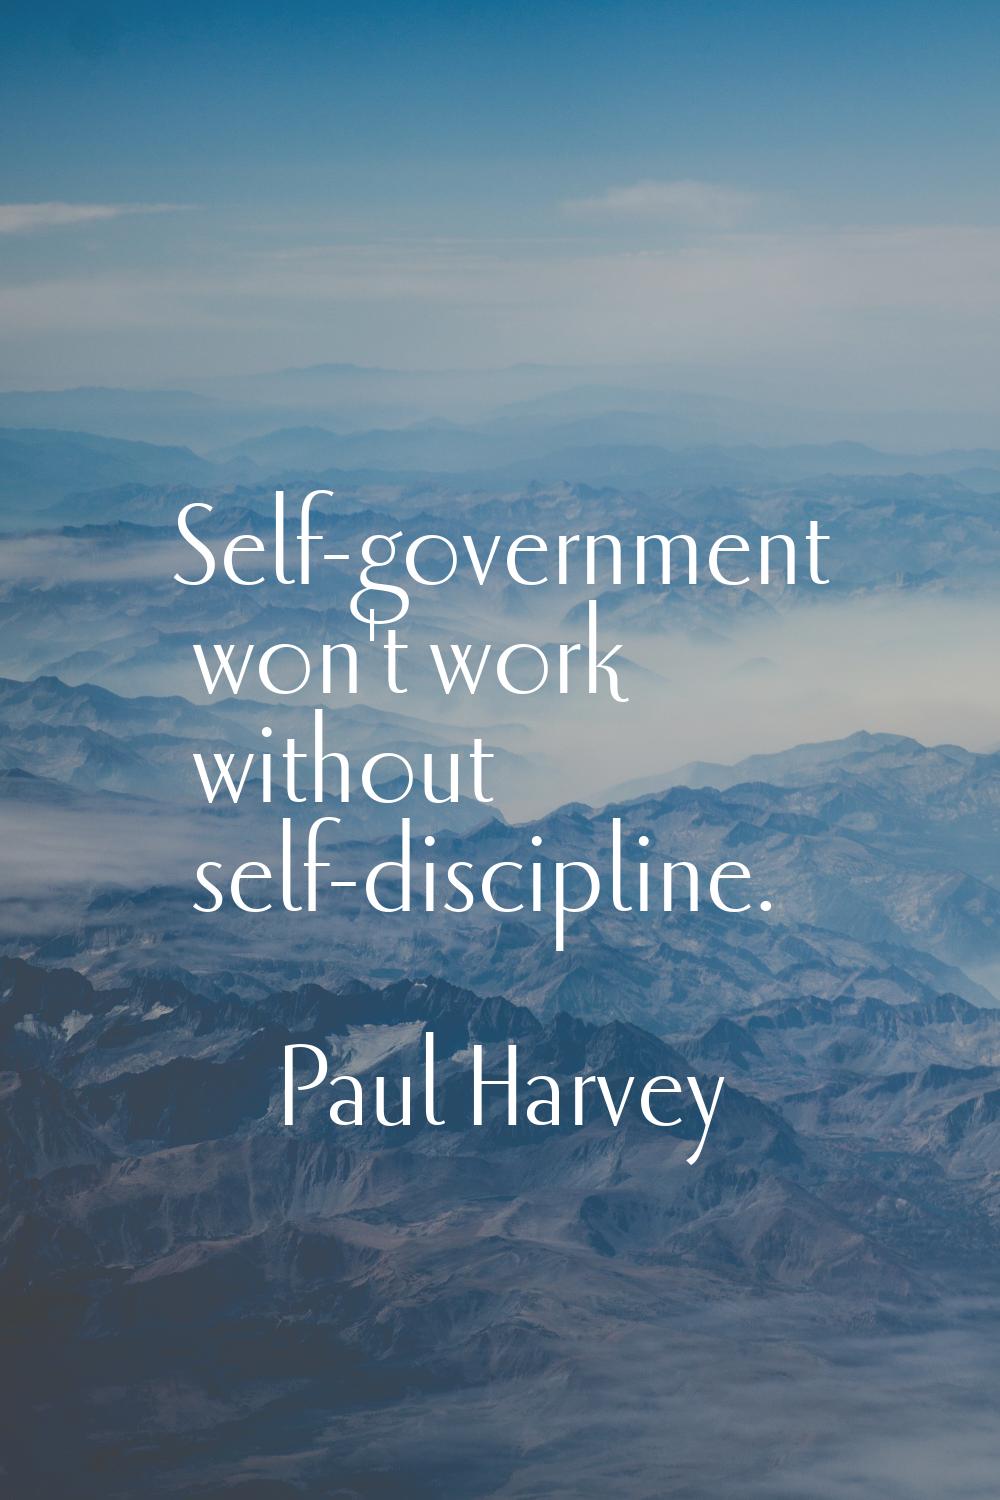 Self-government won't work without self-discipline.